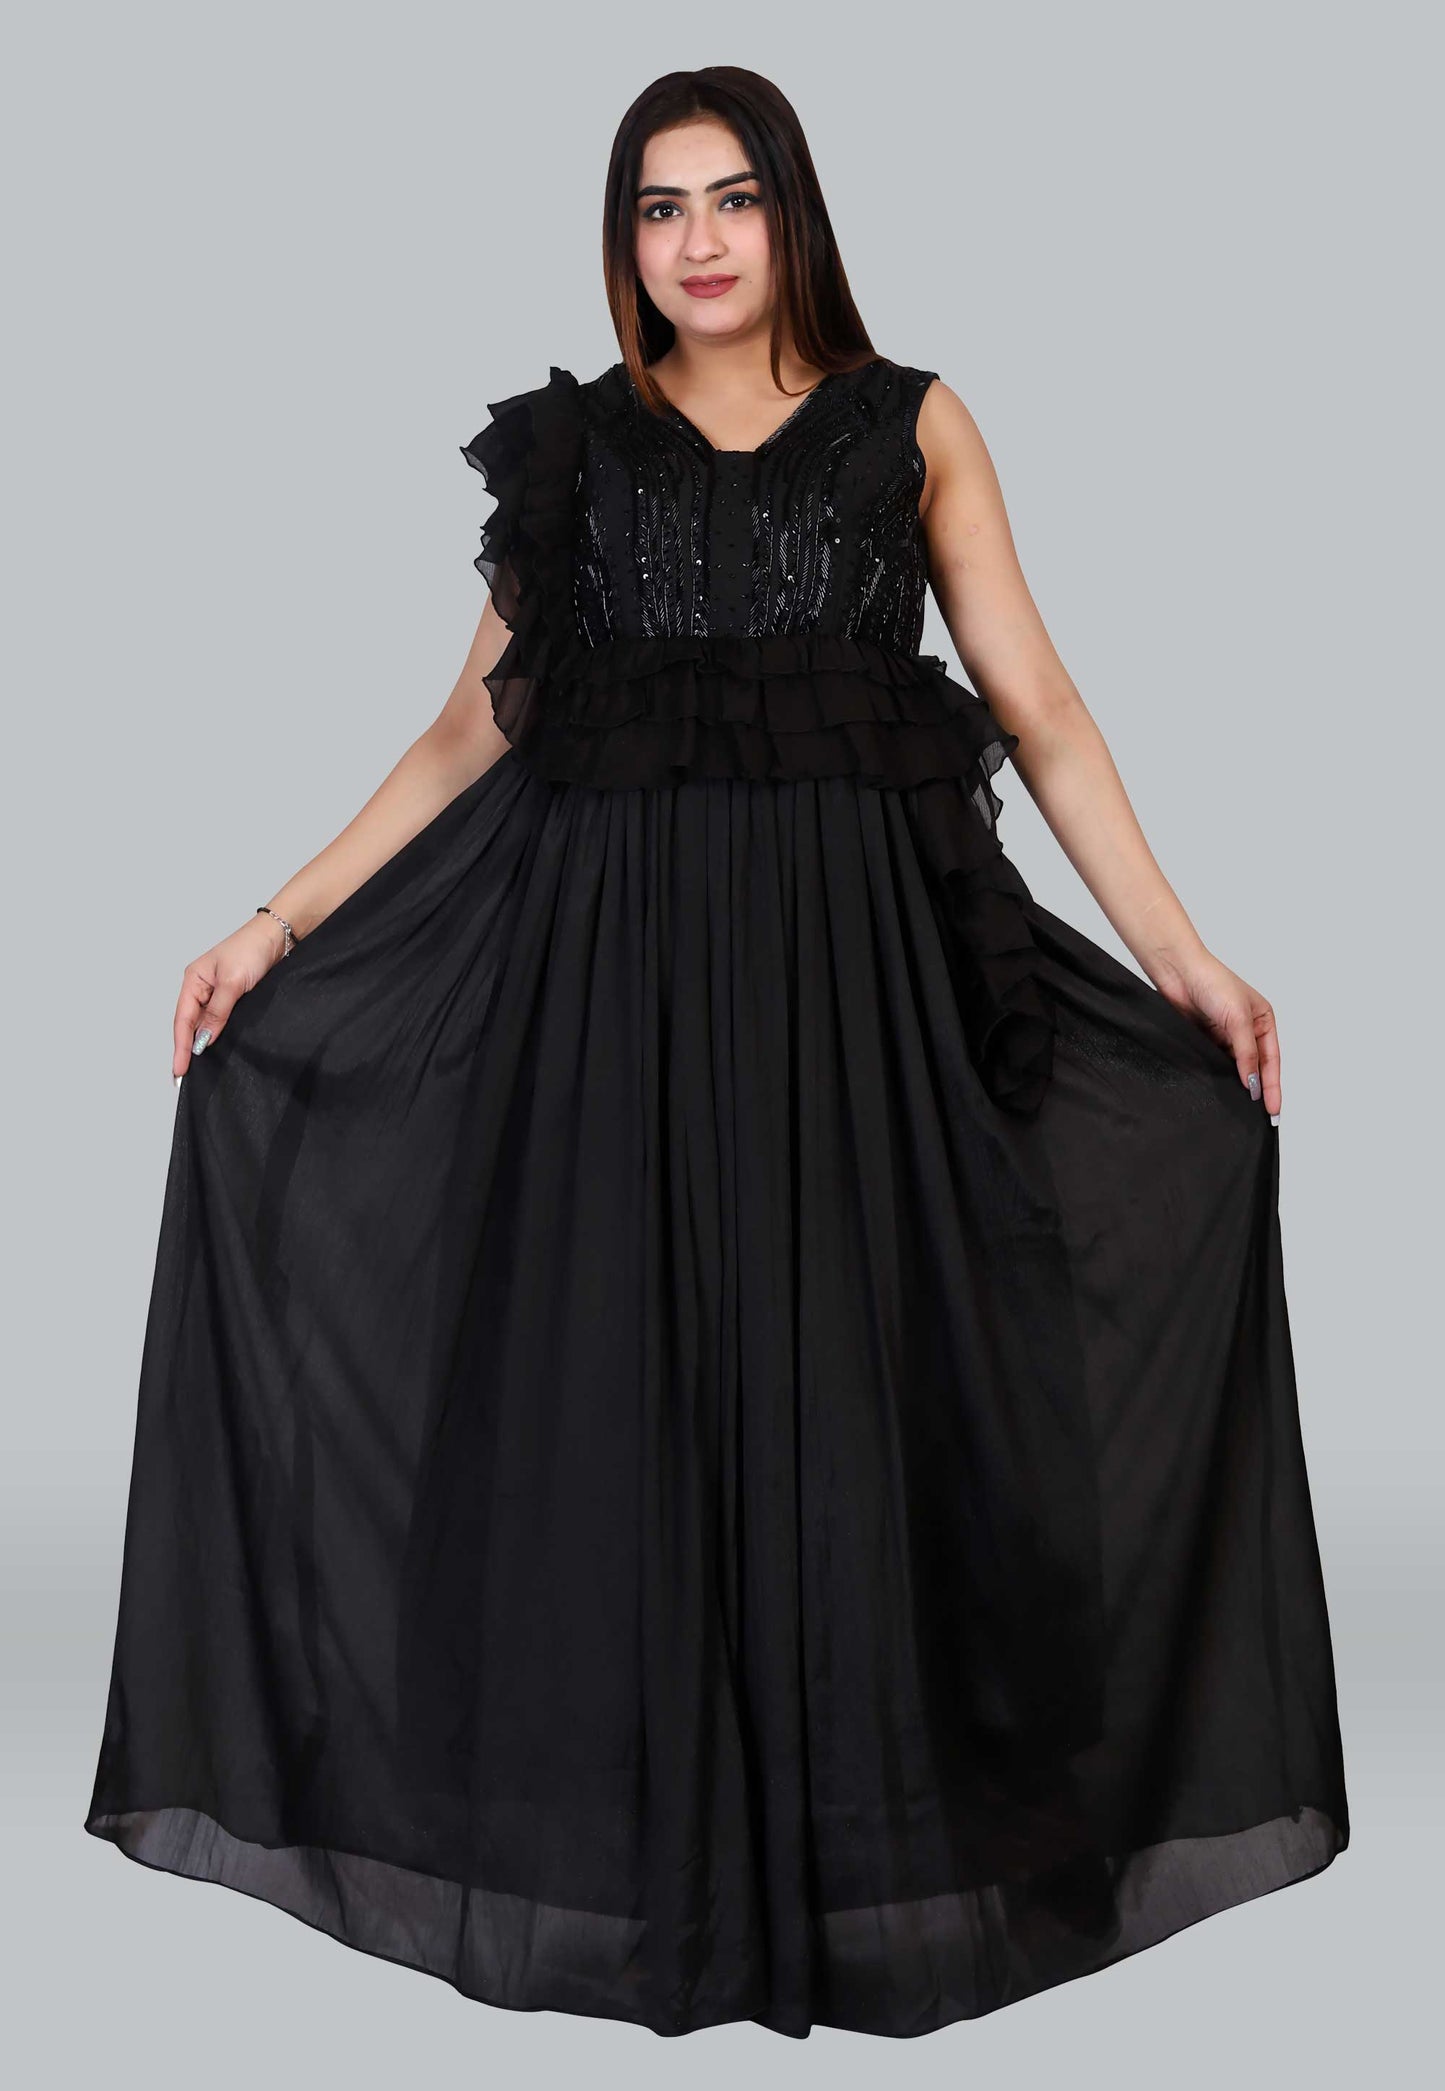 Hand Embroidered Black Chiffon Gown